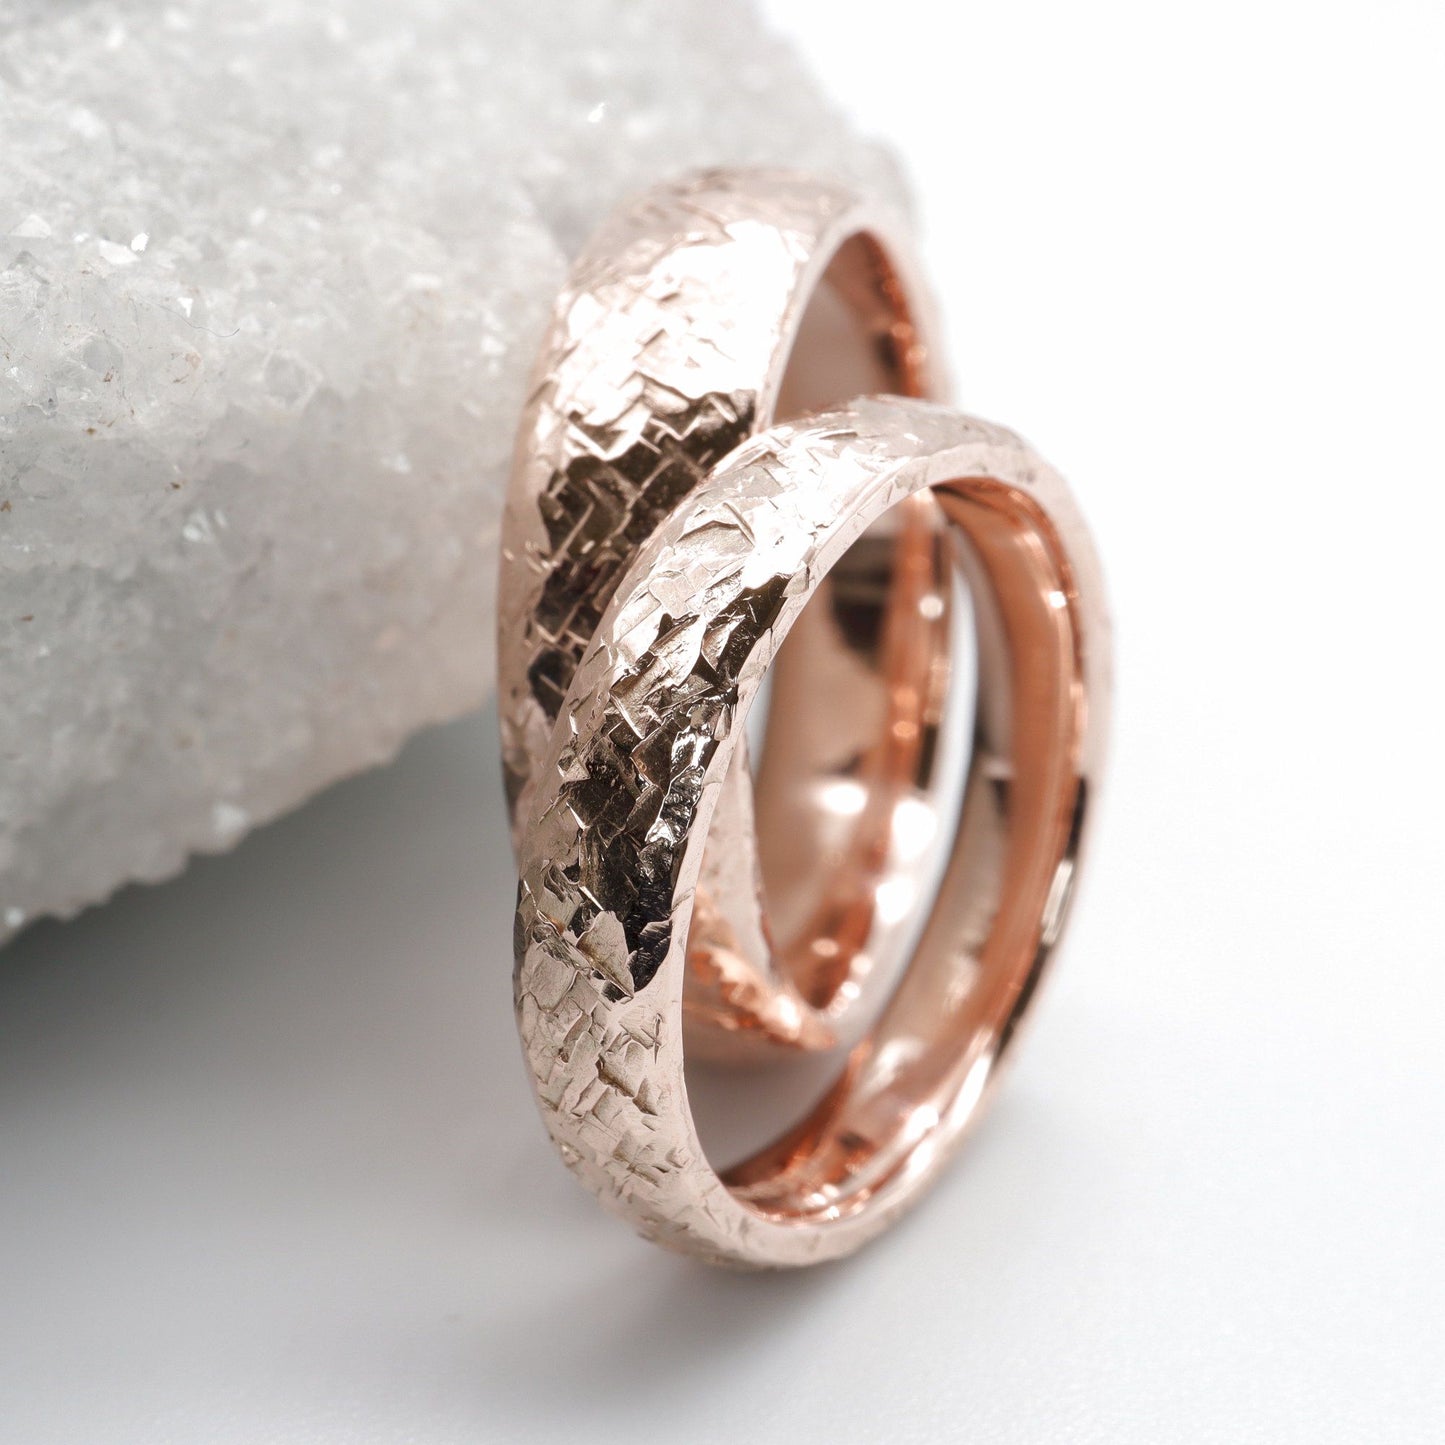 Fire Hammered matching rose gold set, 4mm and 6mm wedding designs.